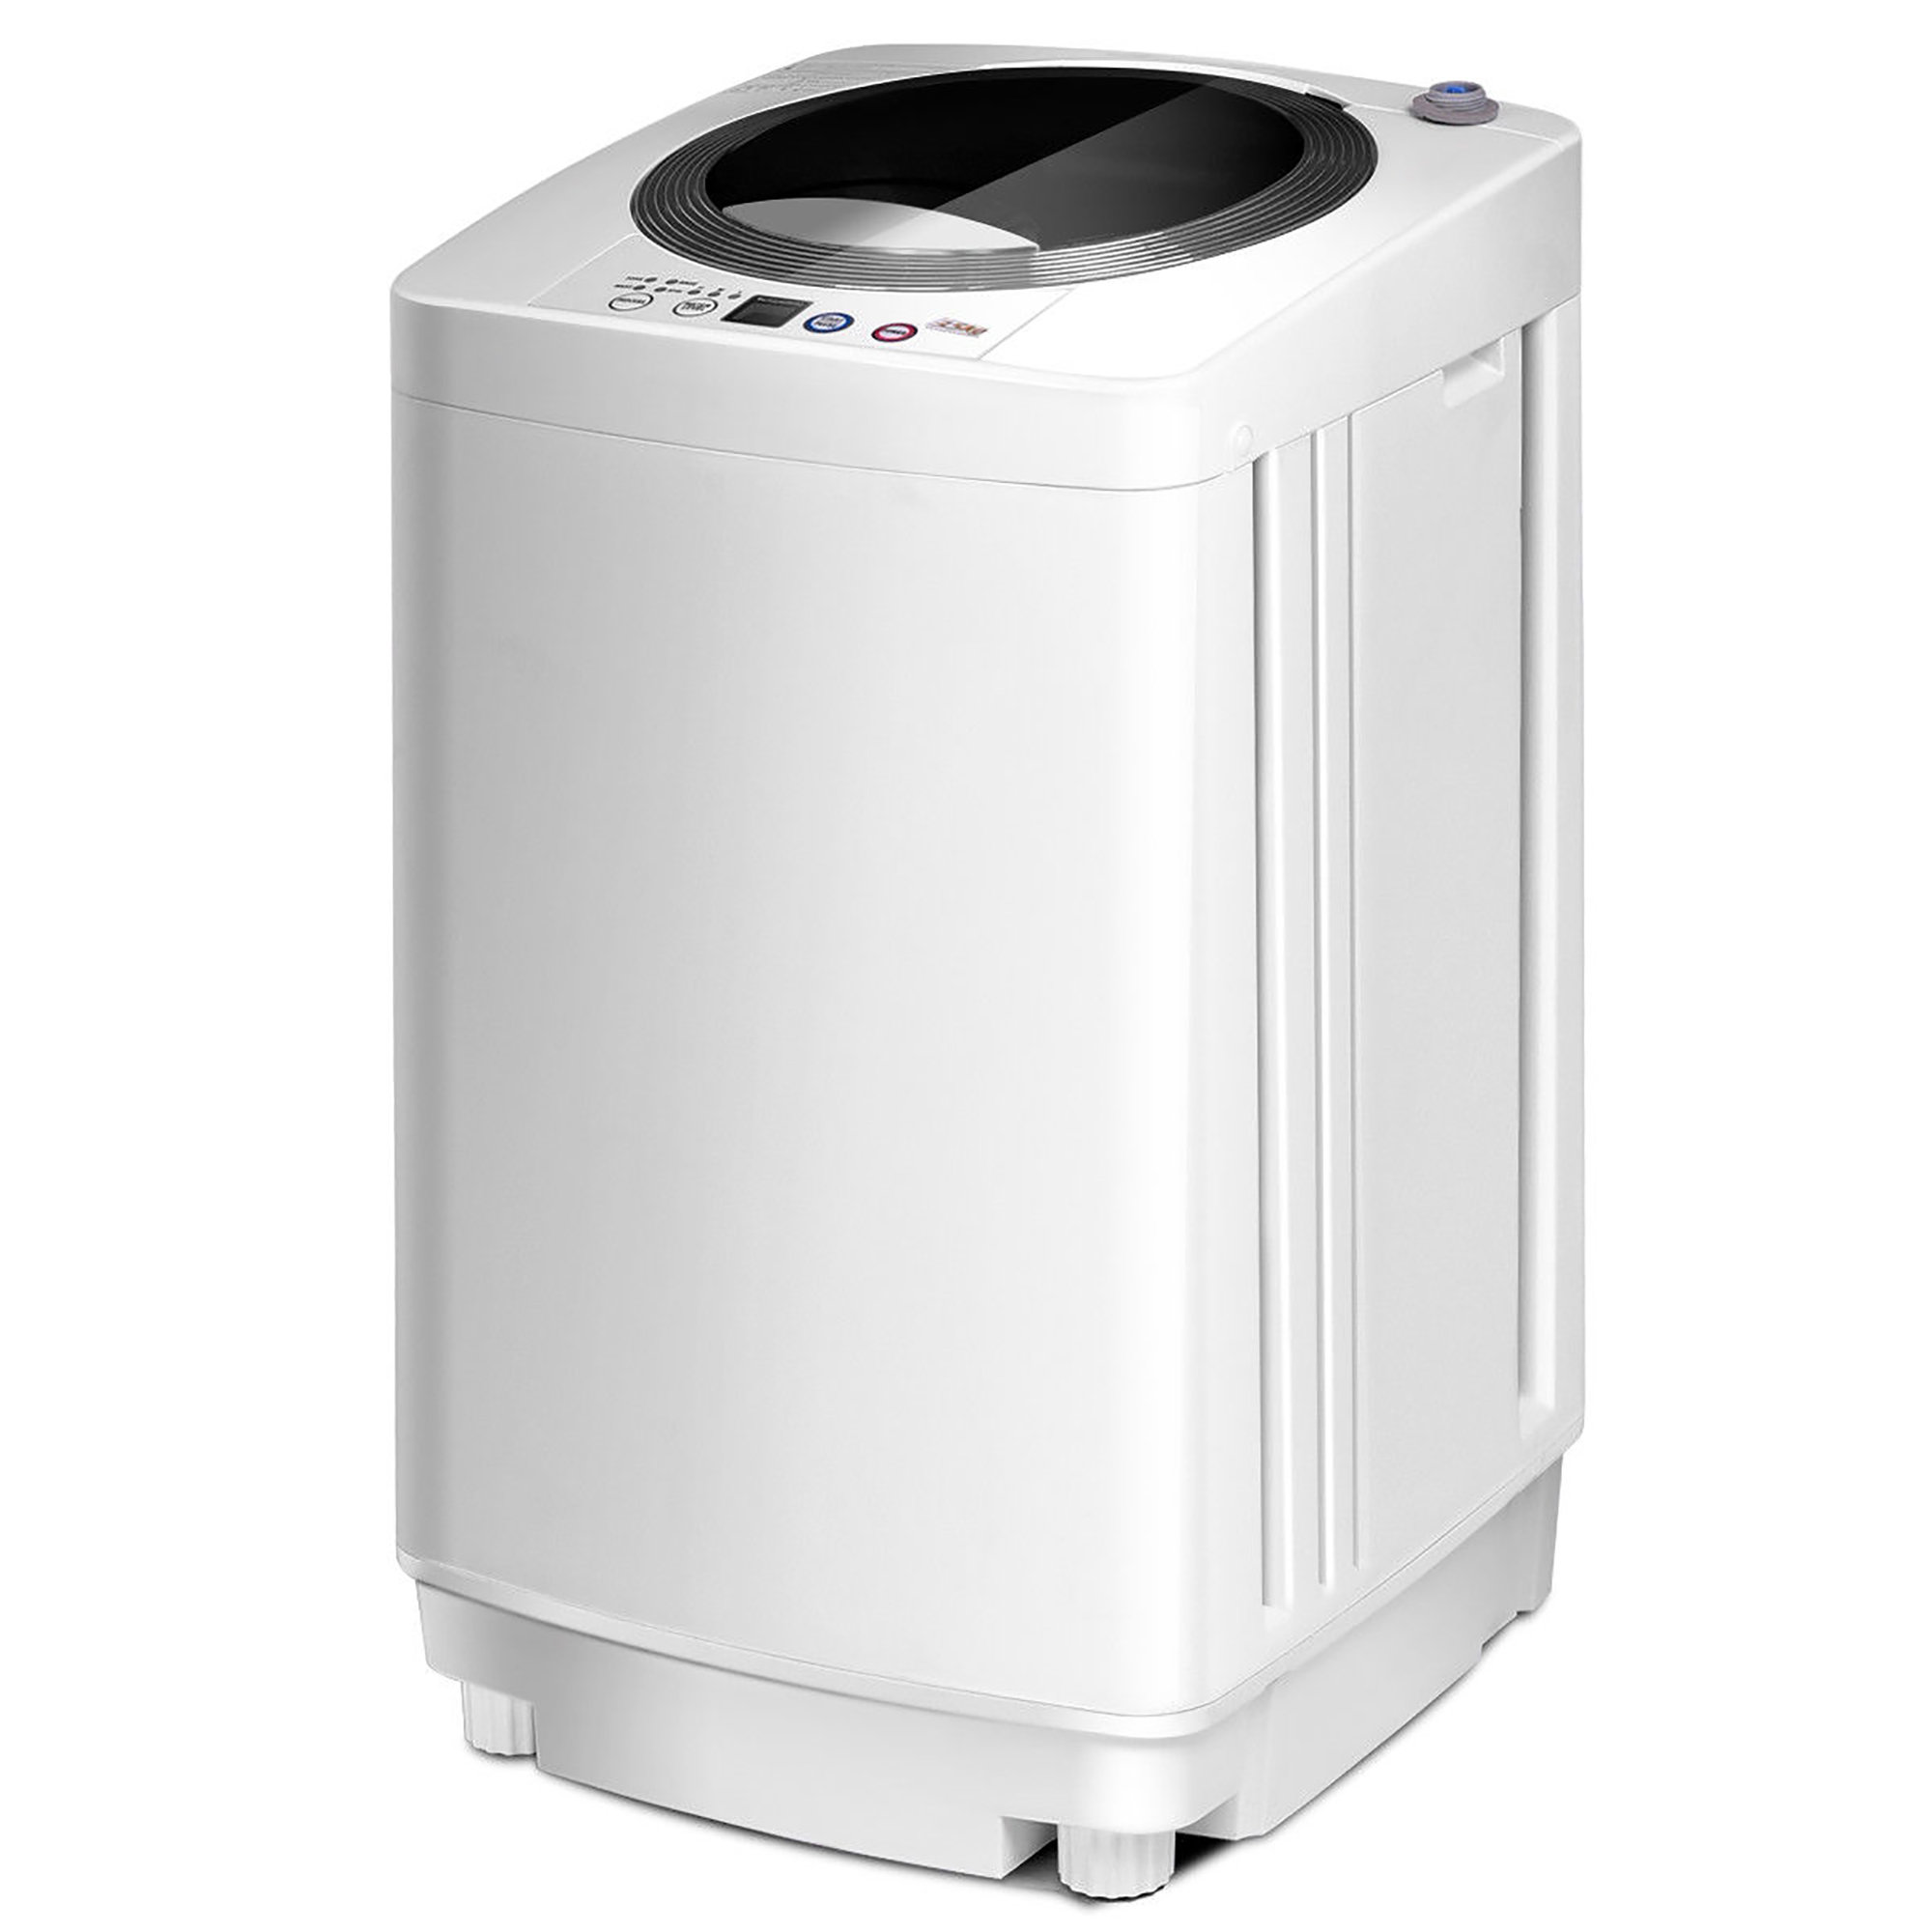 The 7 Best Mini Portable Washing Machines for Every Load of Laundry